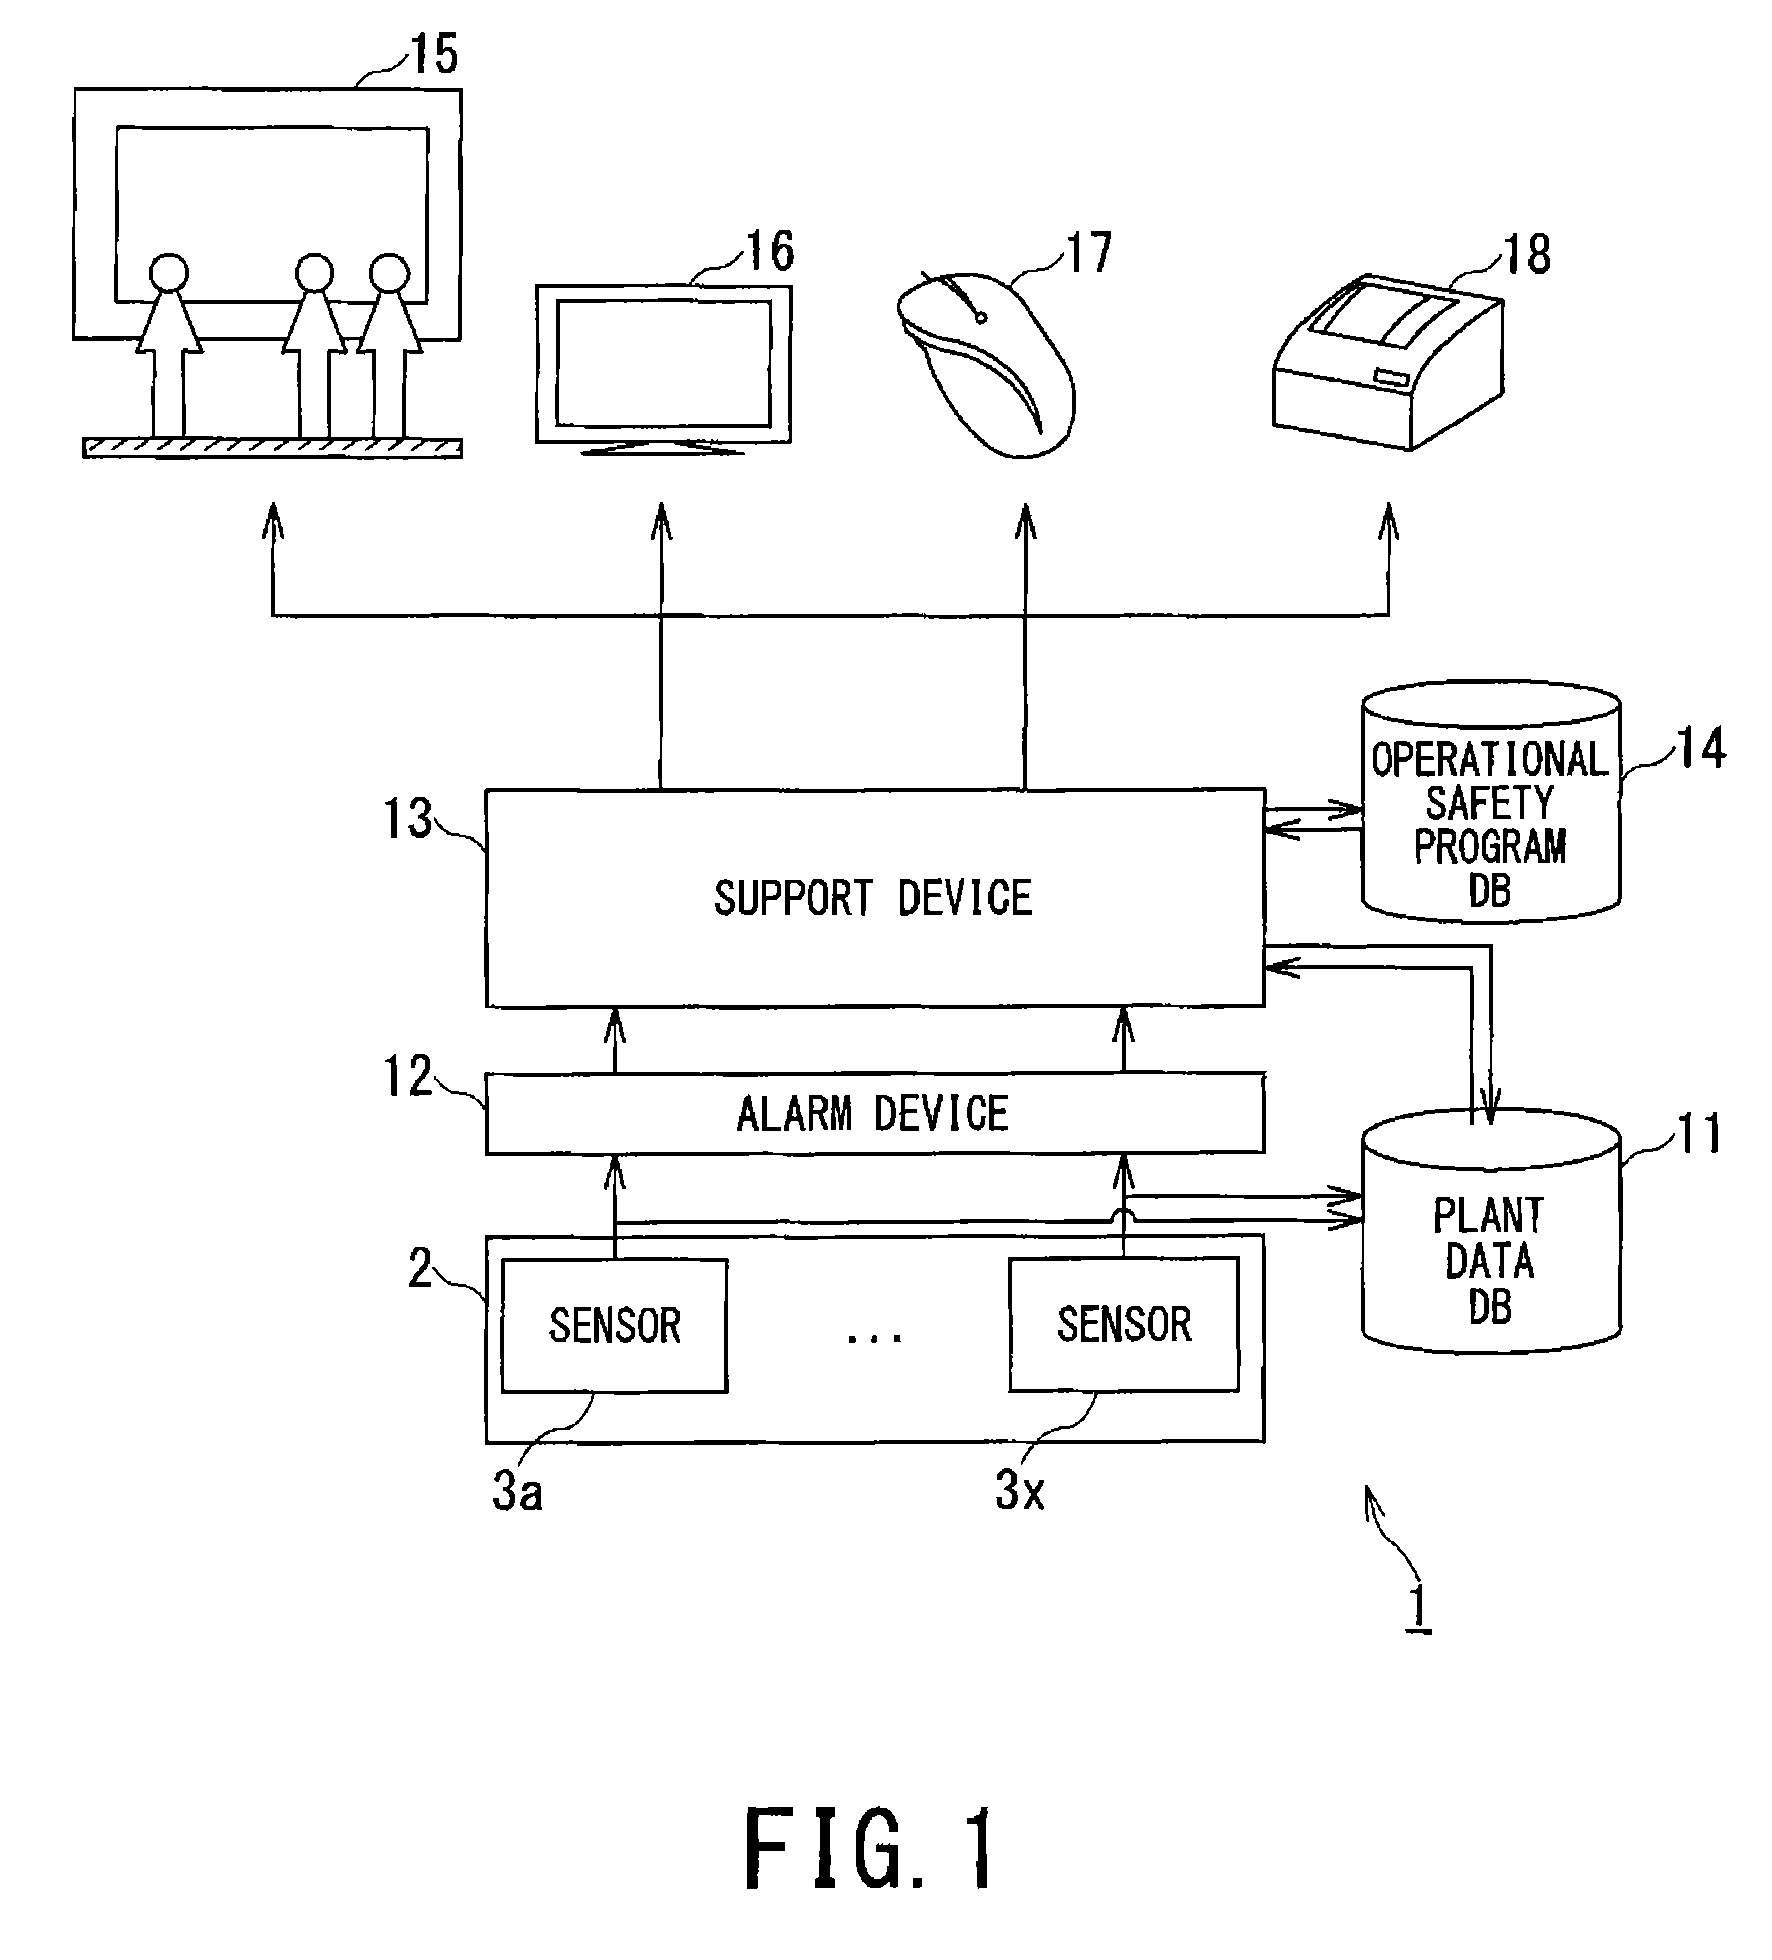 Operation management support apparatus for power plant